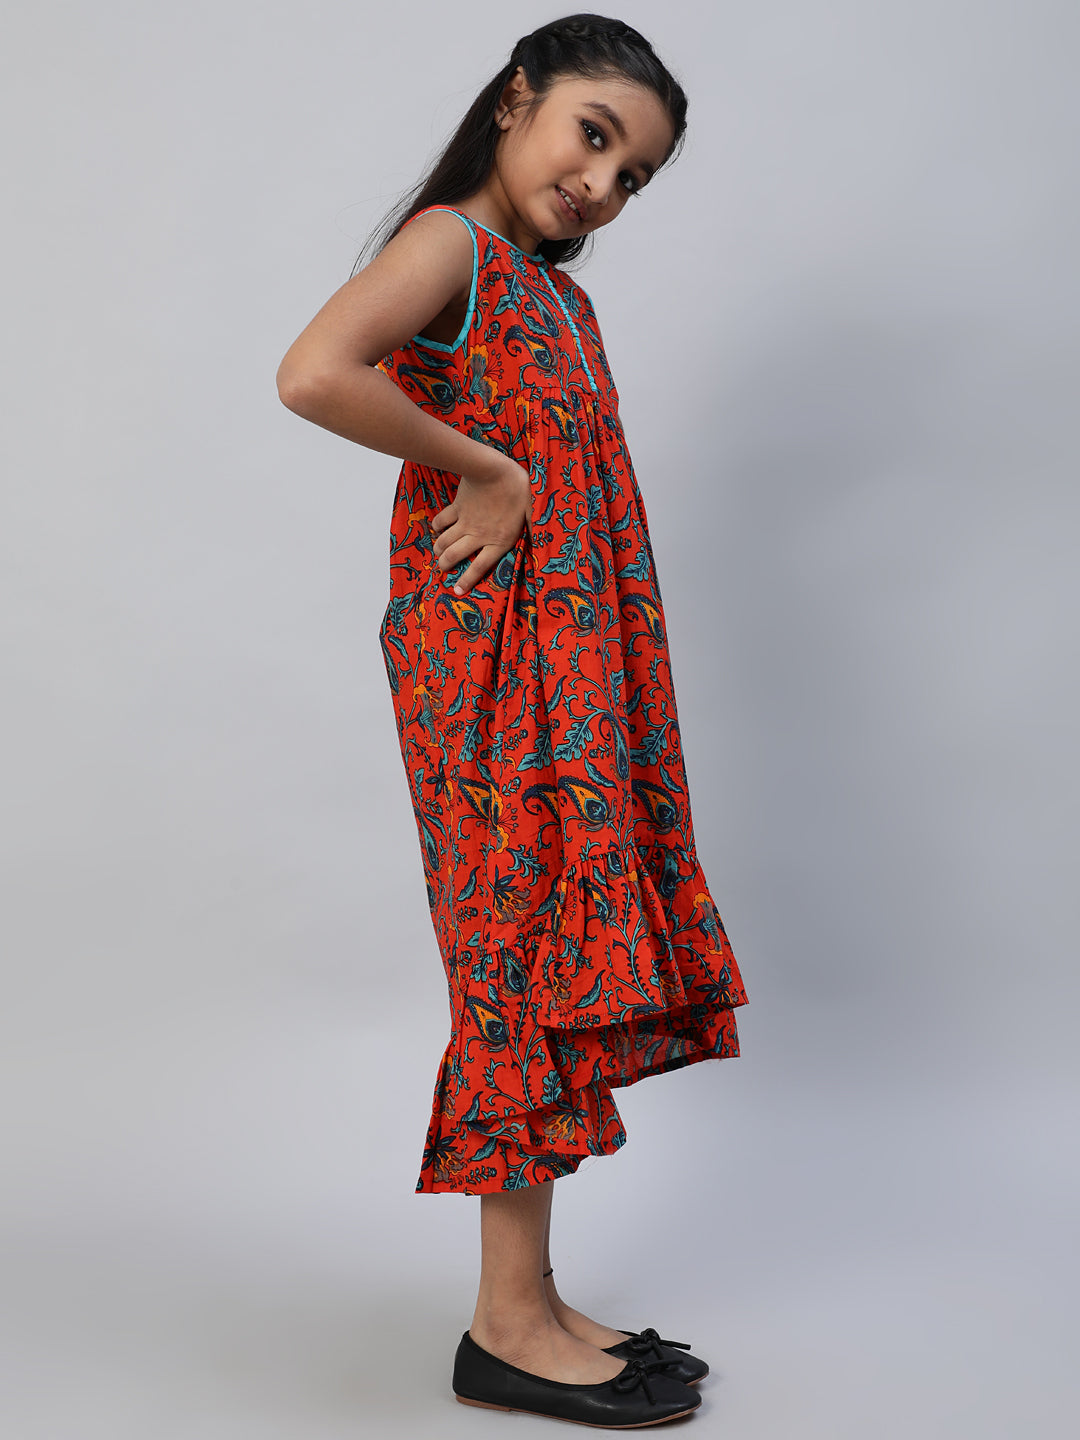 Girl's Red Floral Print A-Line Dress - Aks Girls